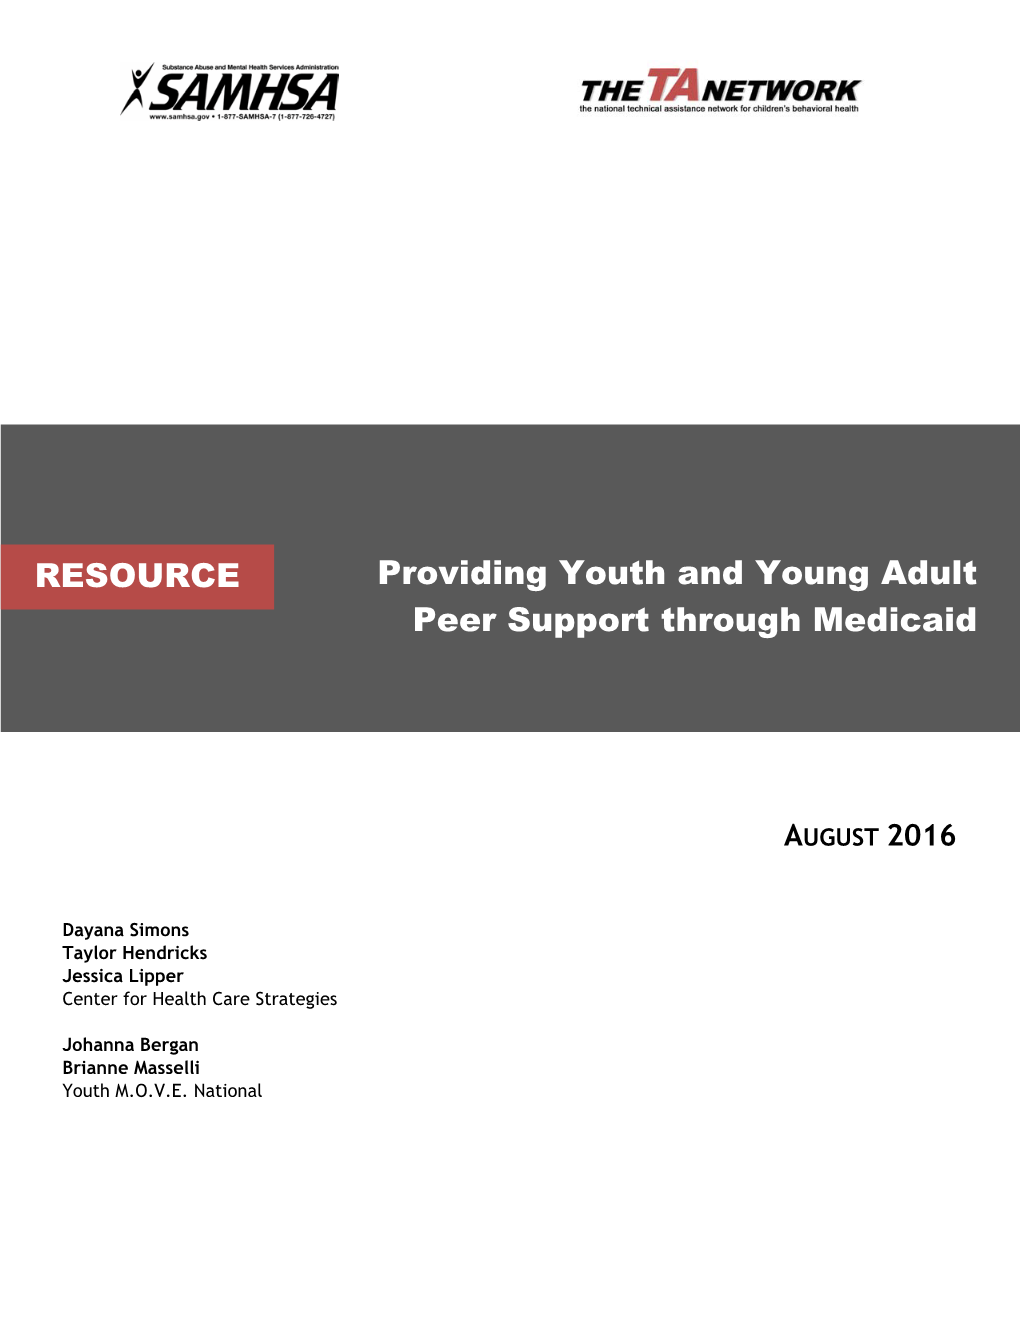 Providing Youth and Young Adult Peer Support Through Medicaid 2 Contents